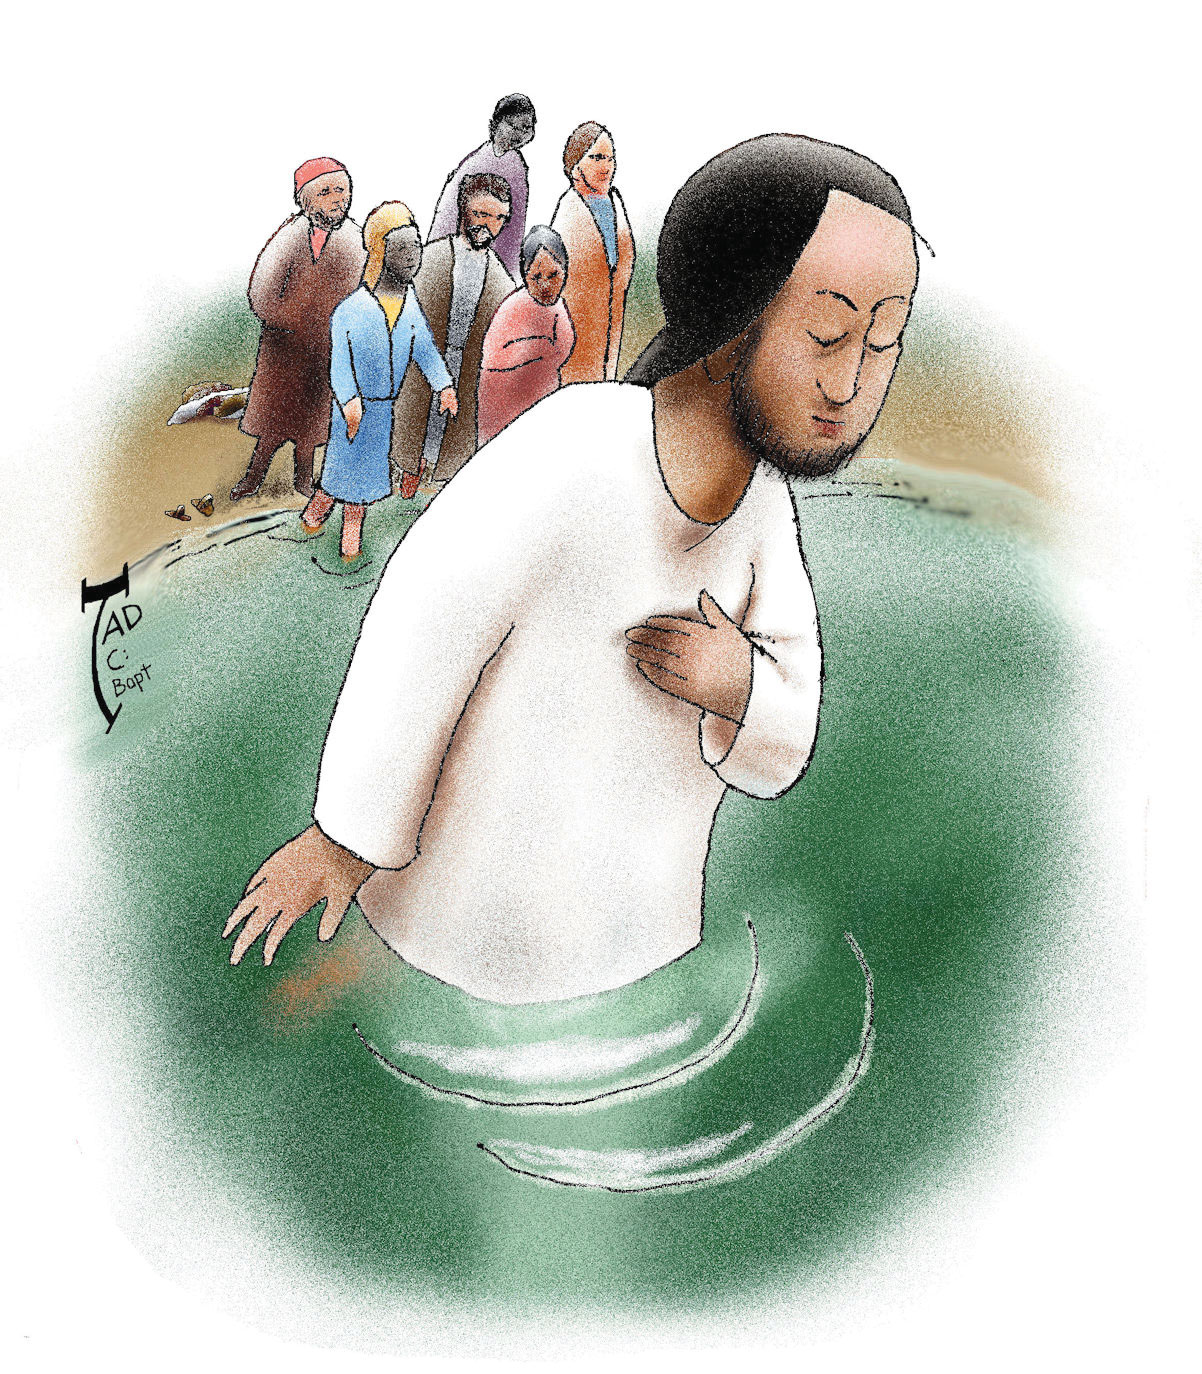 the baptism of jesus clipart